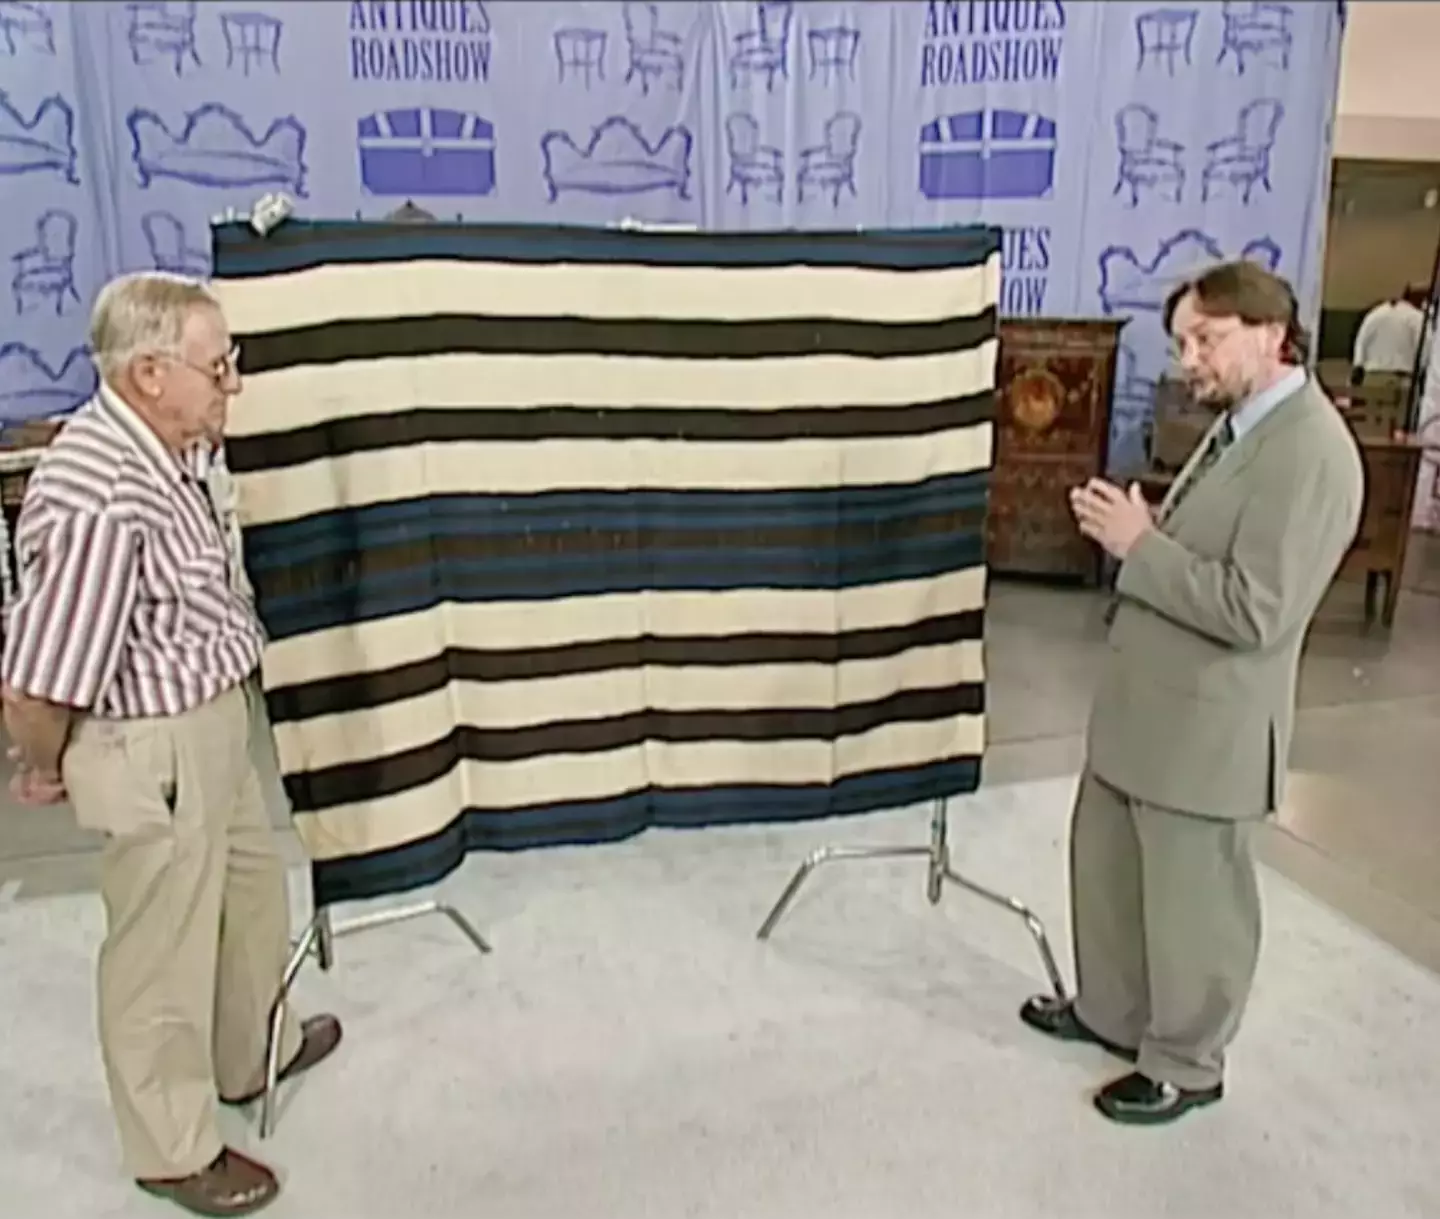 The blanket is a genuine piece of history.